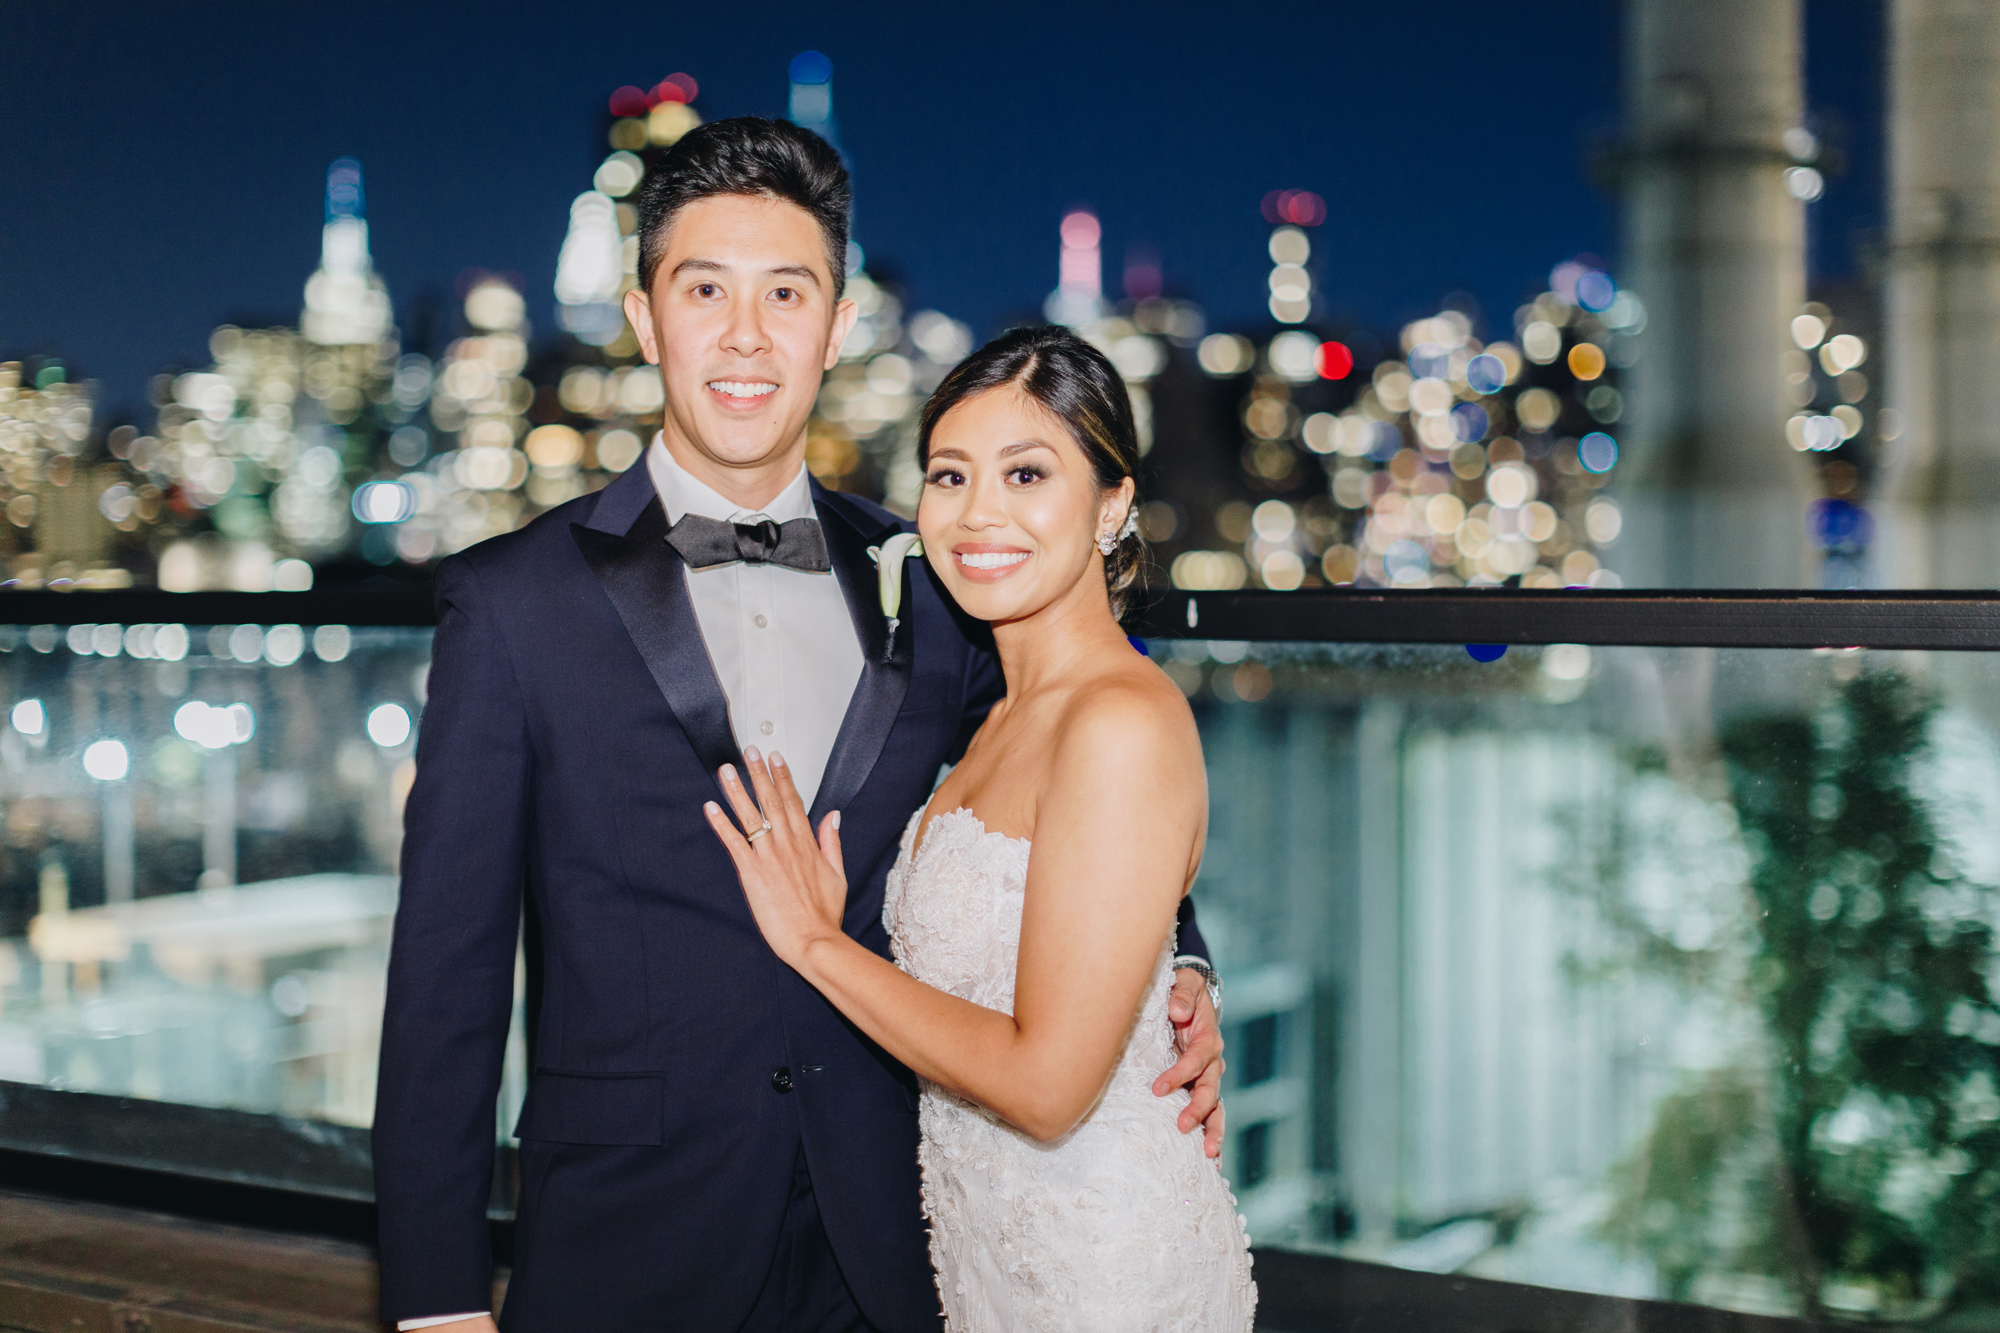 Ravel Hotel wedding portraits on the roof with the New York skyline